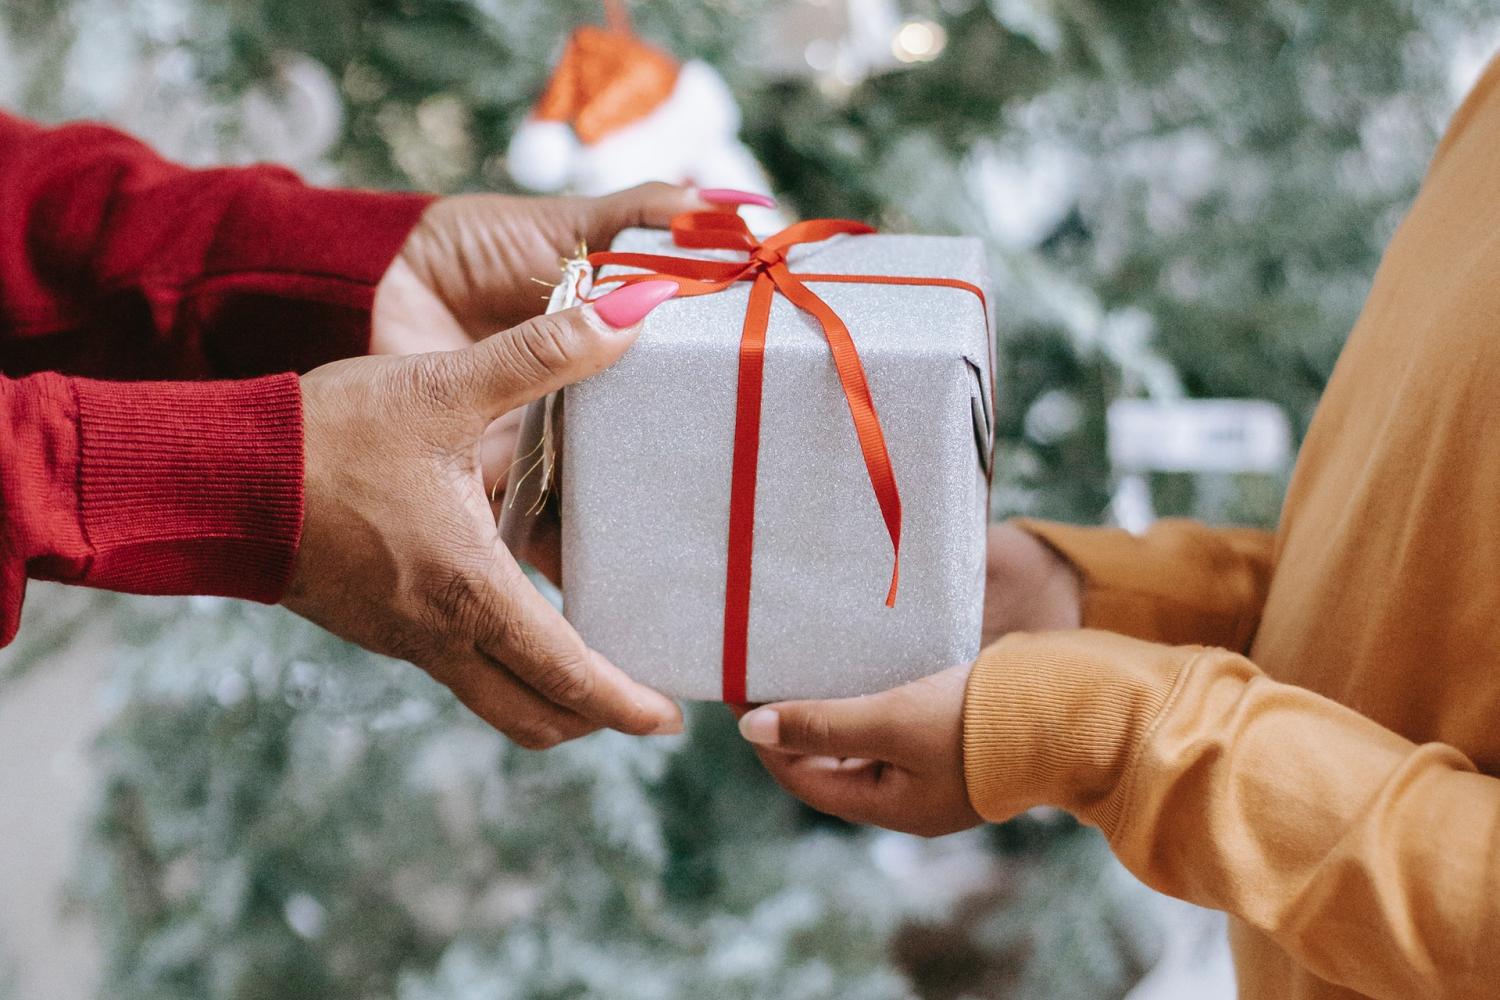 TriplePundit Sustainable Holiday Gifts Guide 2020